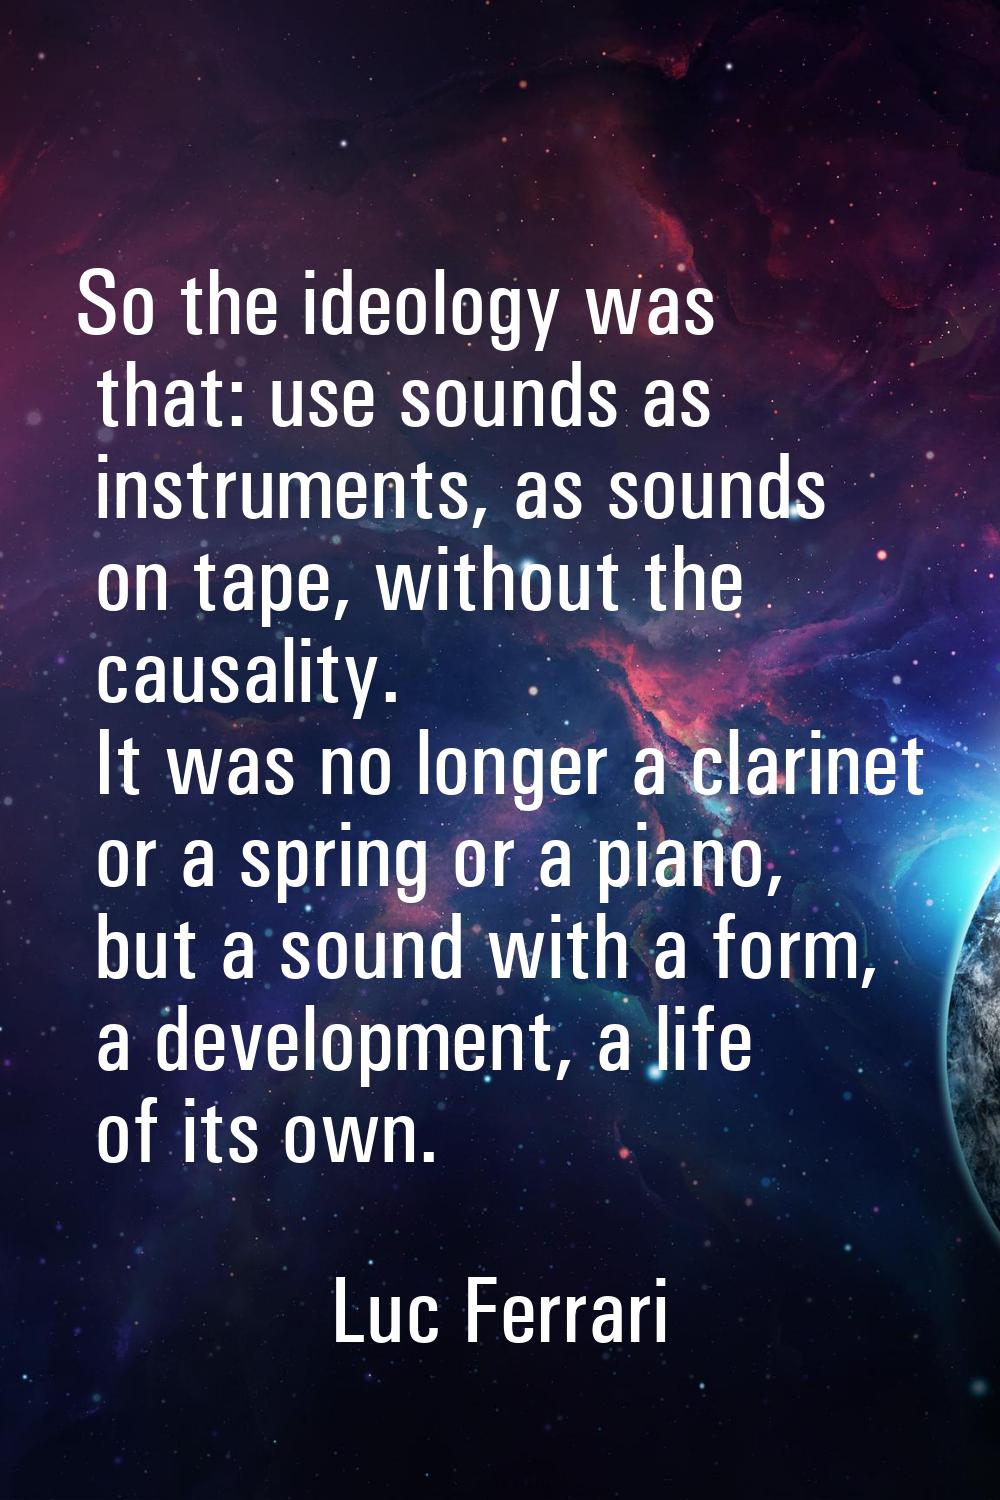 So the ideology was that: use sounds as instruments, as sounds on tape, without the causality. It w